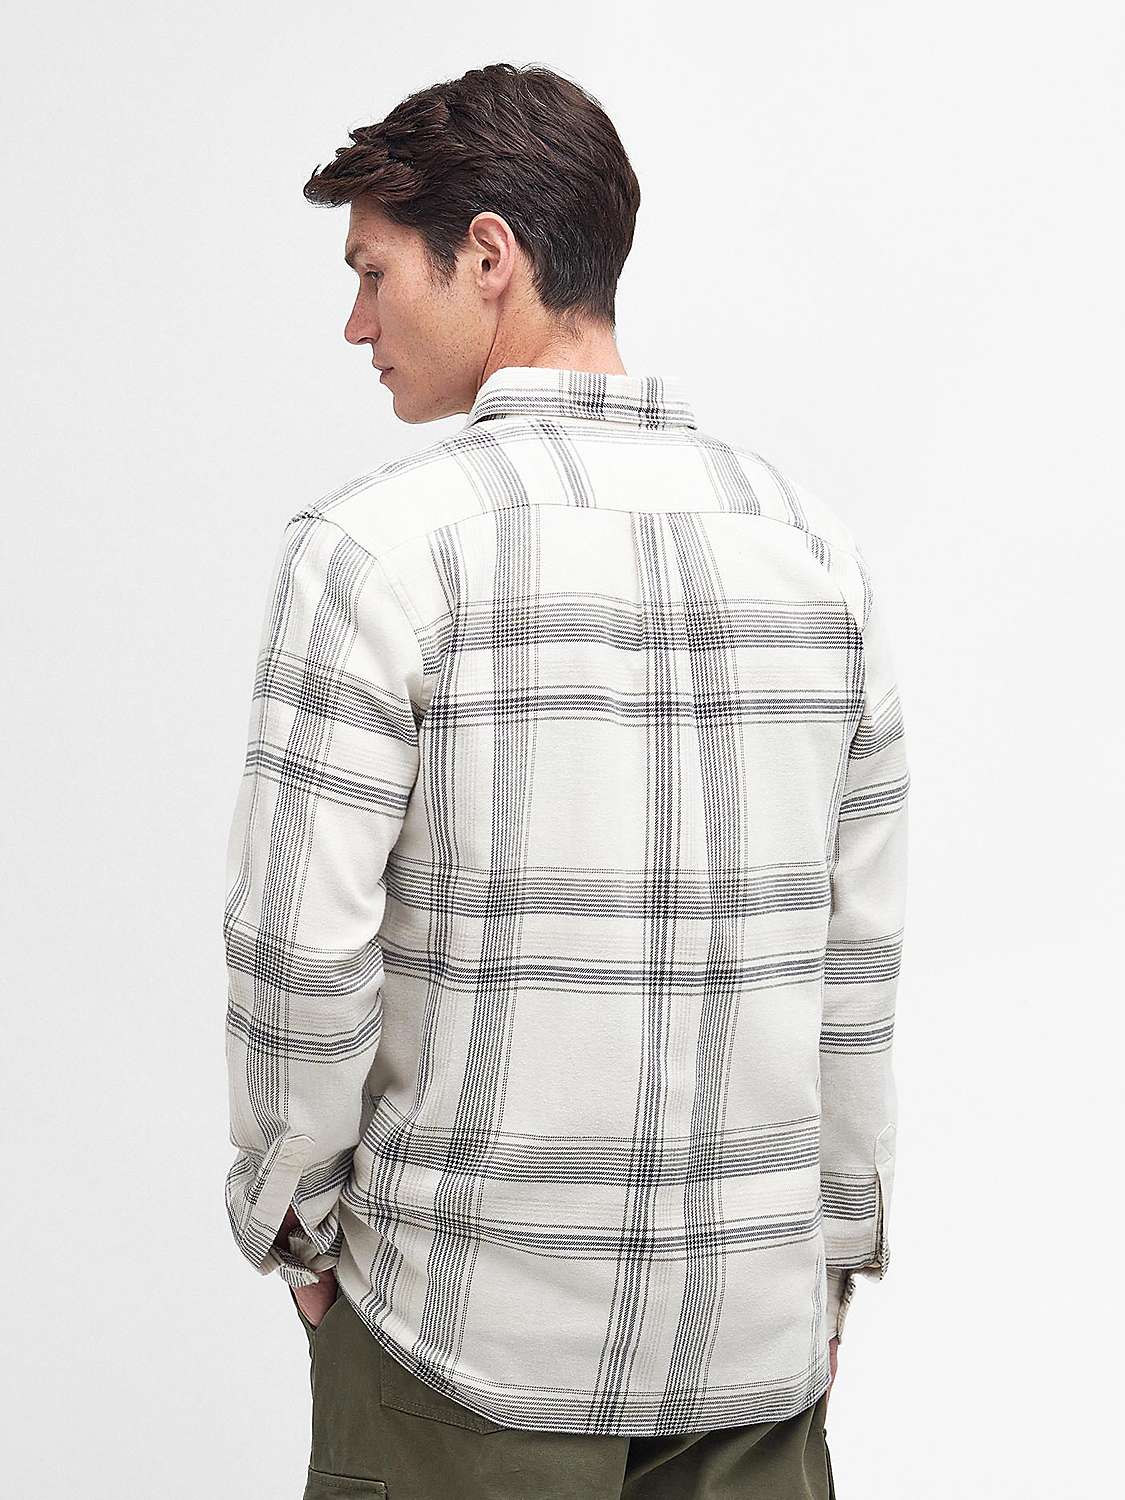 Buy Barbour Dartmouth Long Sleeve Shirt Online at johnlewis.com